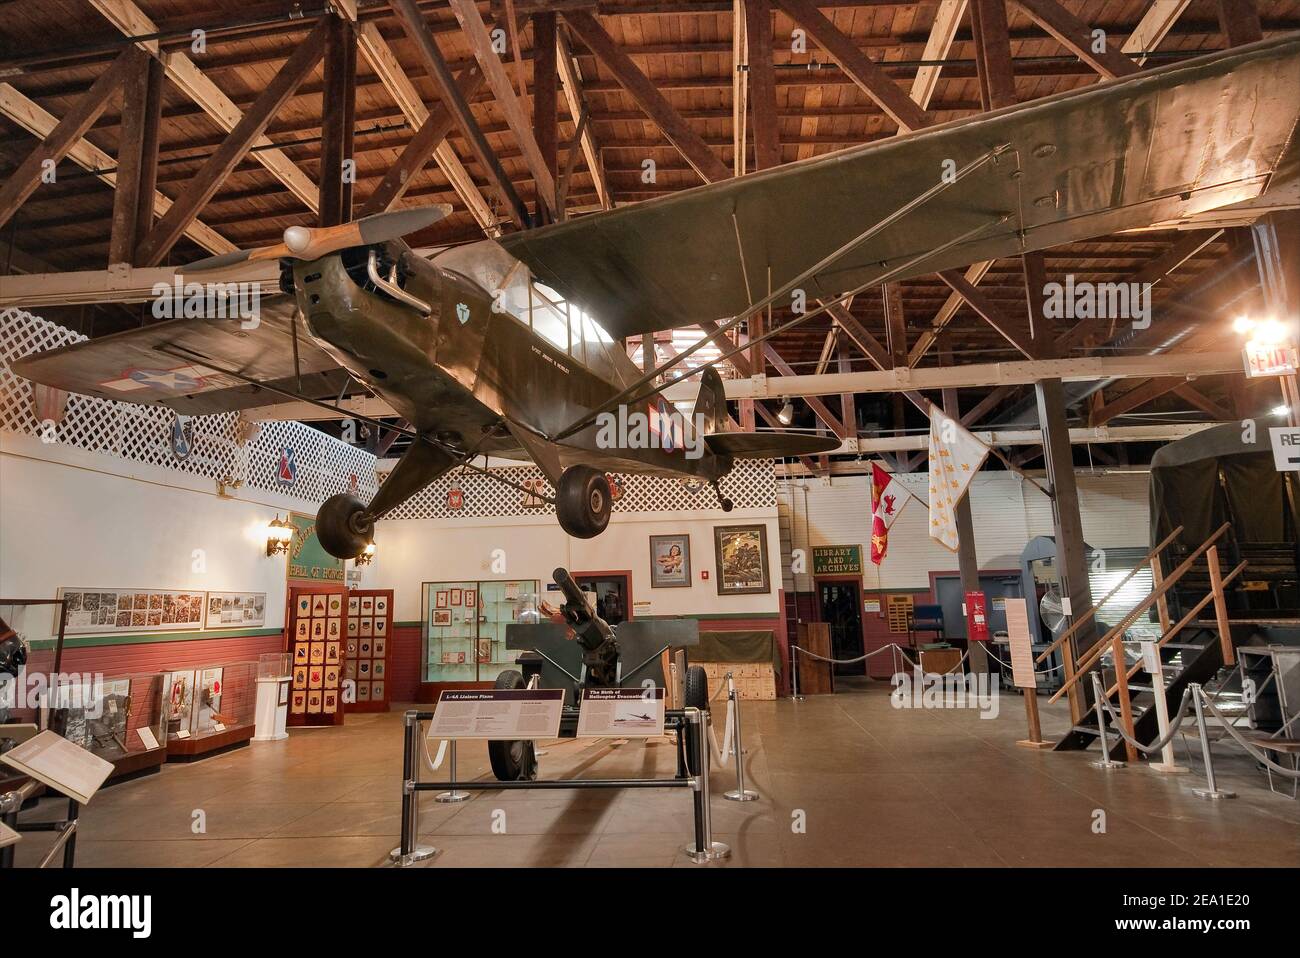 L4 Piper Cub liaison plane, Great Hall at Texas Military Forces Museum at Camp Mabry in Austin, Texas, USA Stock Photo